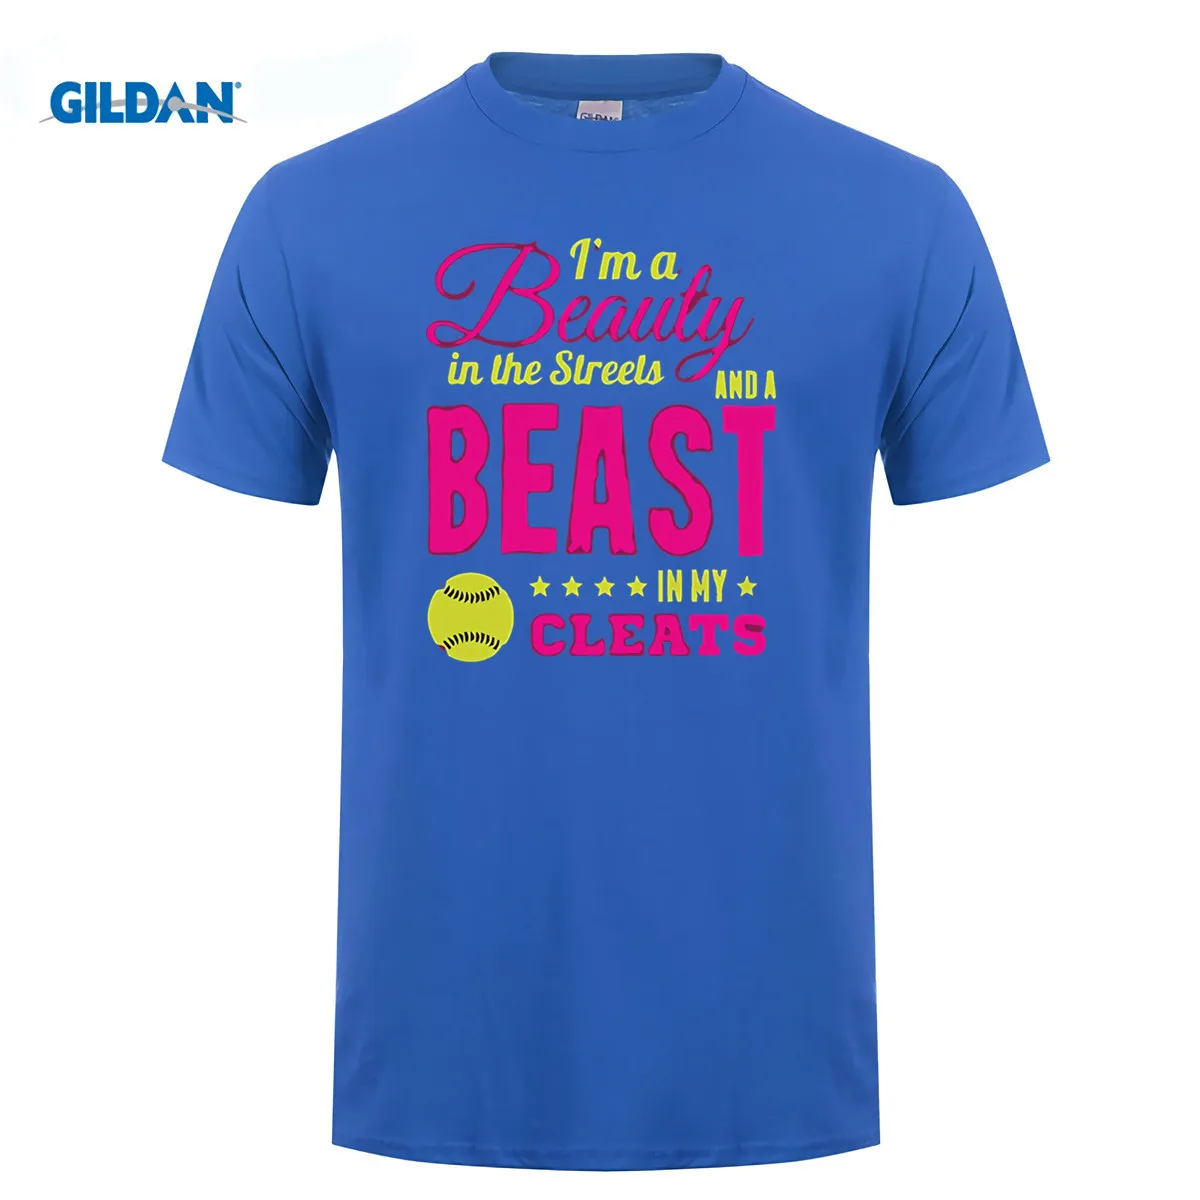 

Im A Beauty In The Streets And Beast Cleats Softball T-Shirt